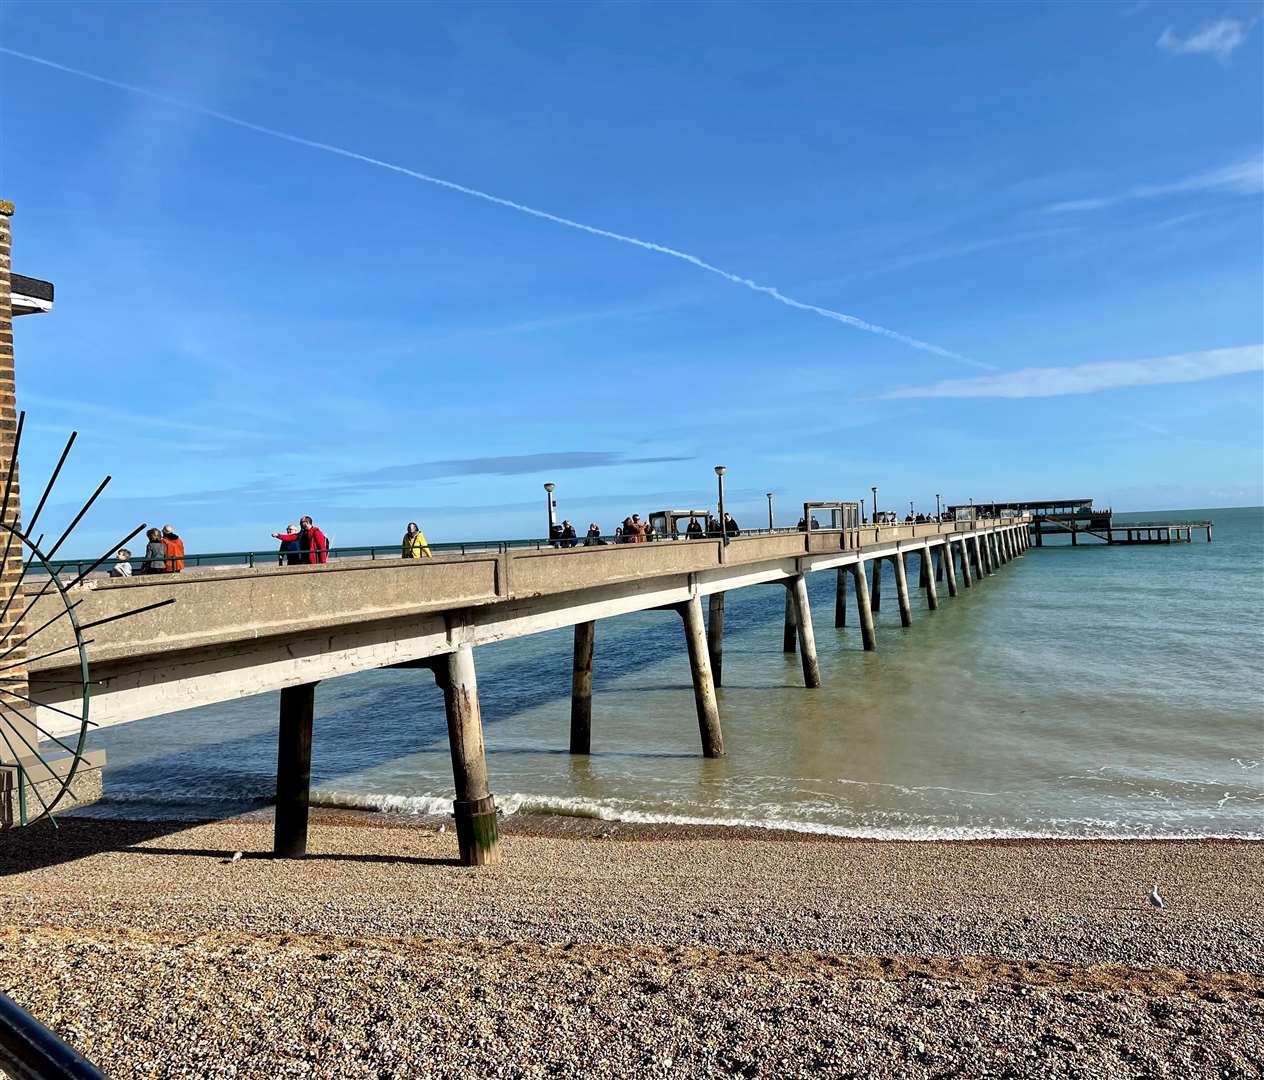 Deal Pier is owned by Dover District Council